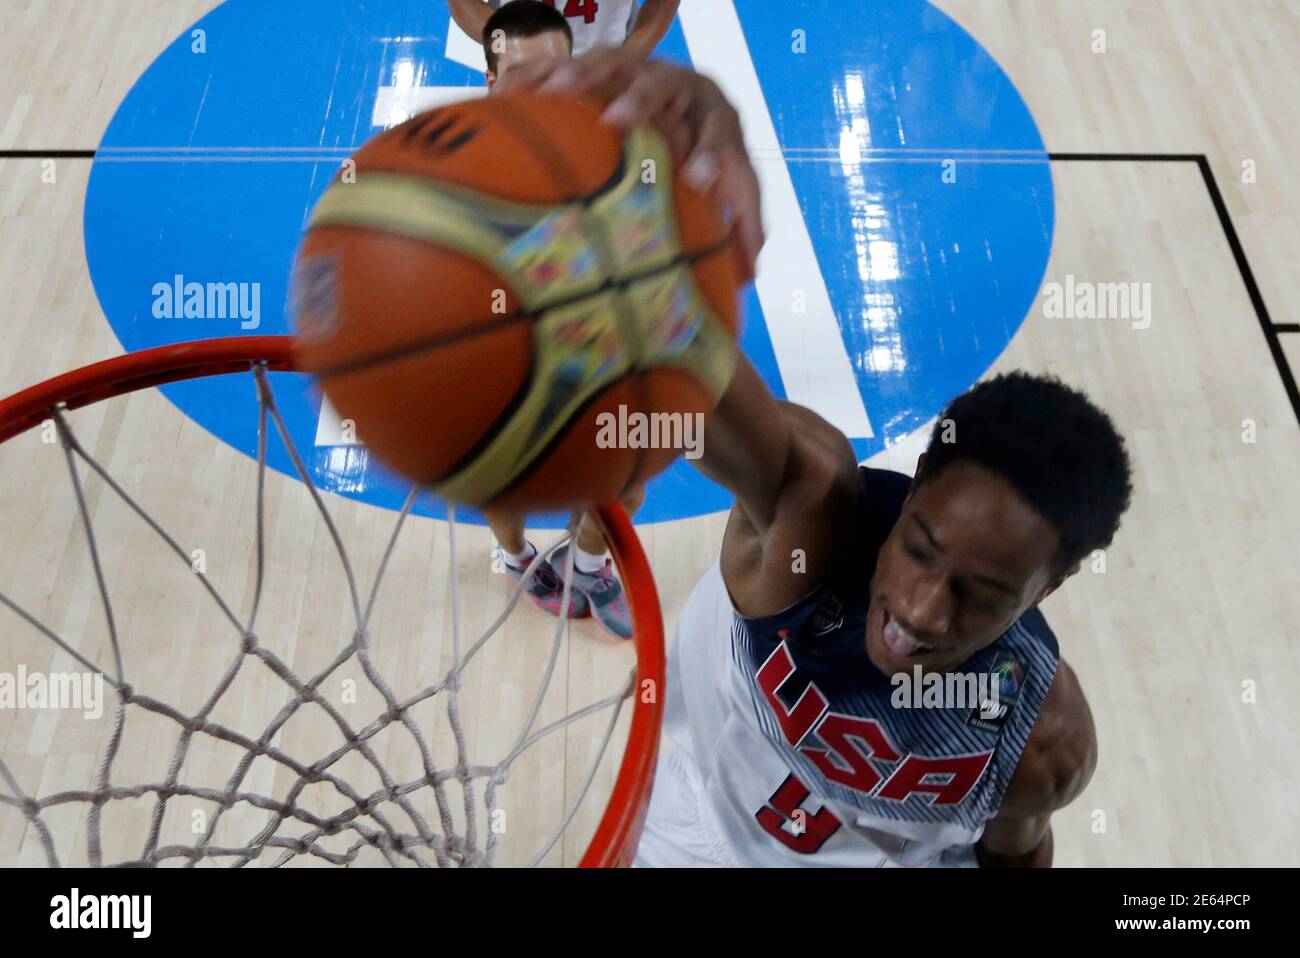 DeMar Derozan of the U.S. goes for a dunk against Serbia during their  Basketball World Cup final game in Madrid September 14, 2014.  REUTERS/Sergio Perez (SPAIN - Tags: SPORT BASKETBALL Photo Stock - Alamy